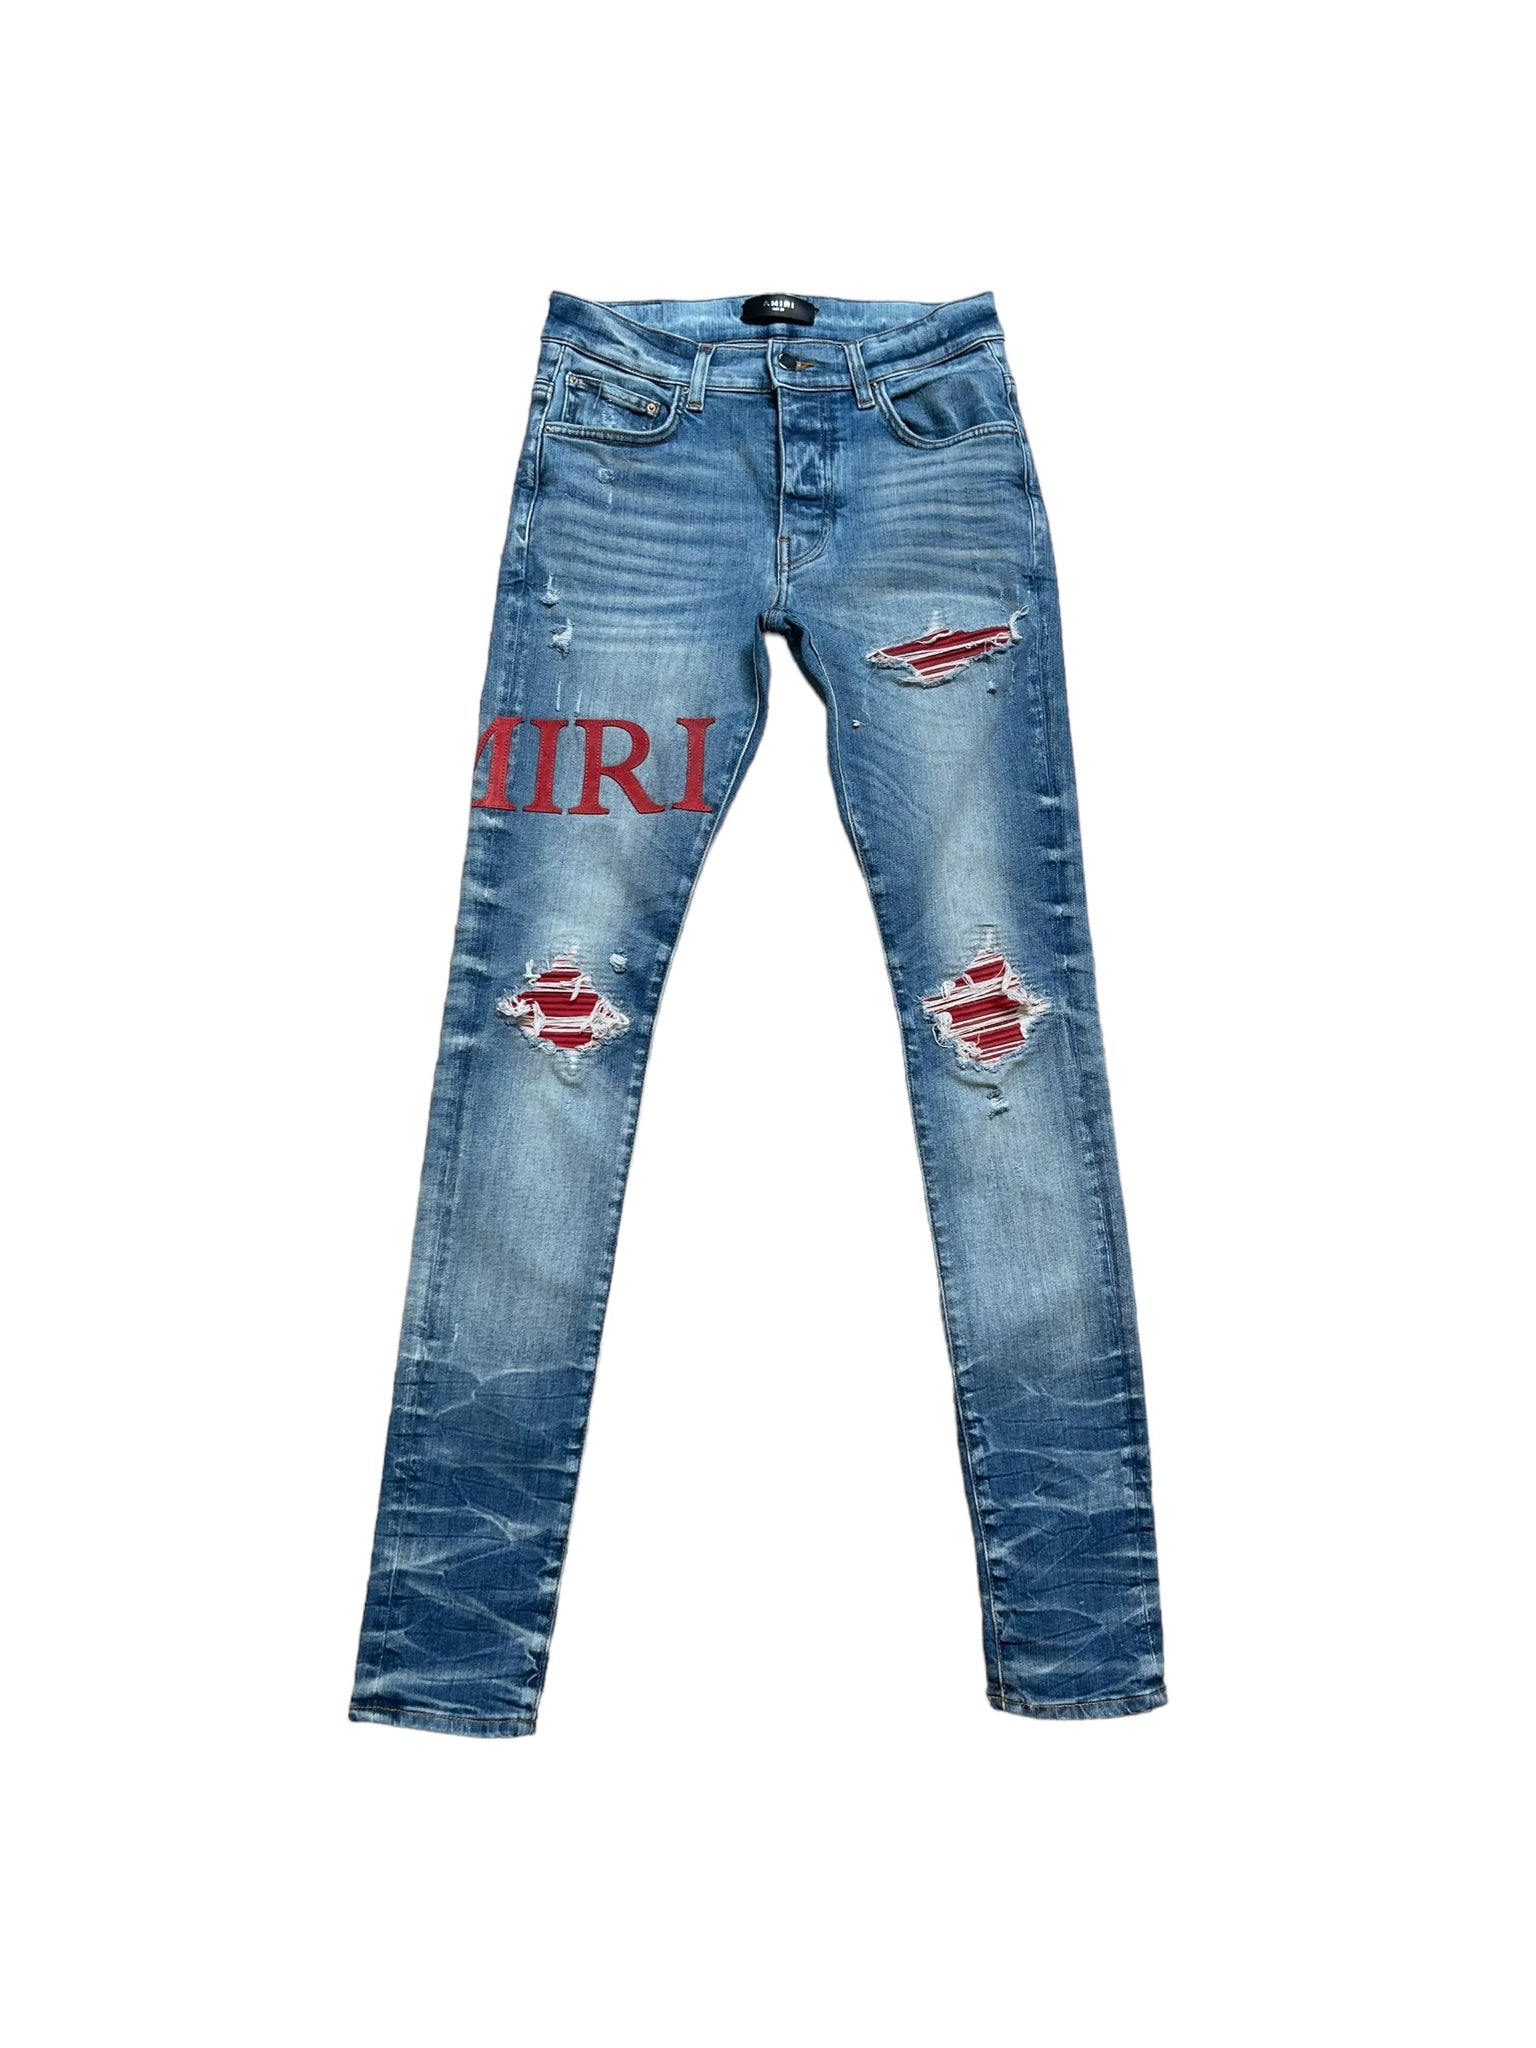 Amiri Mx1 Jeans Red Patch "Light Wash"